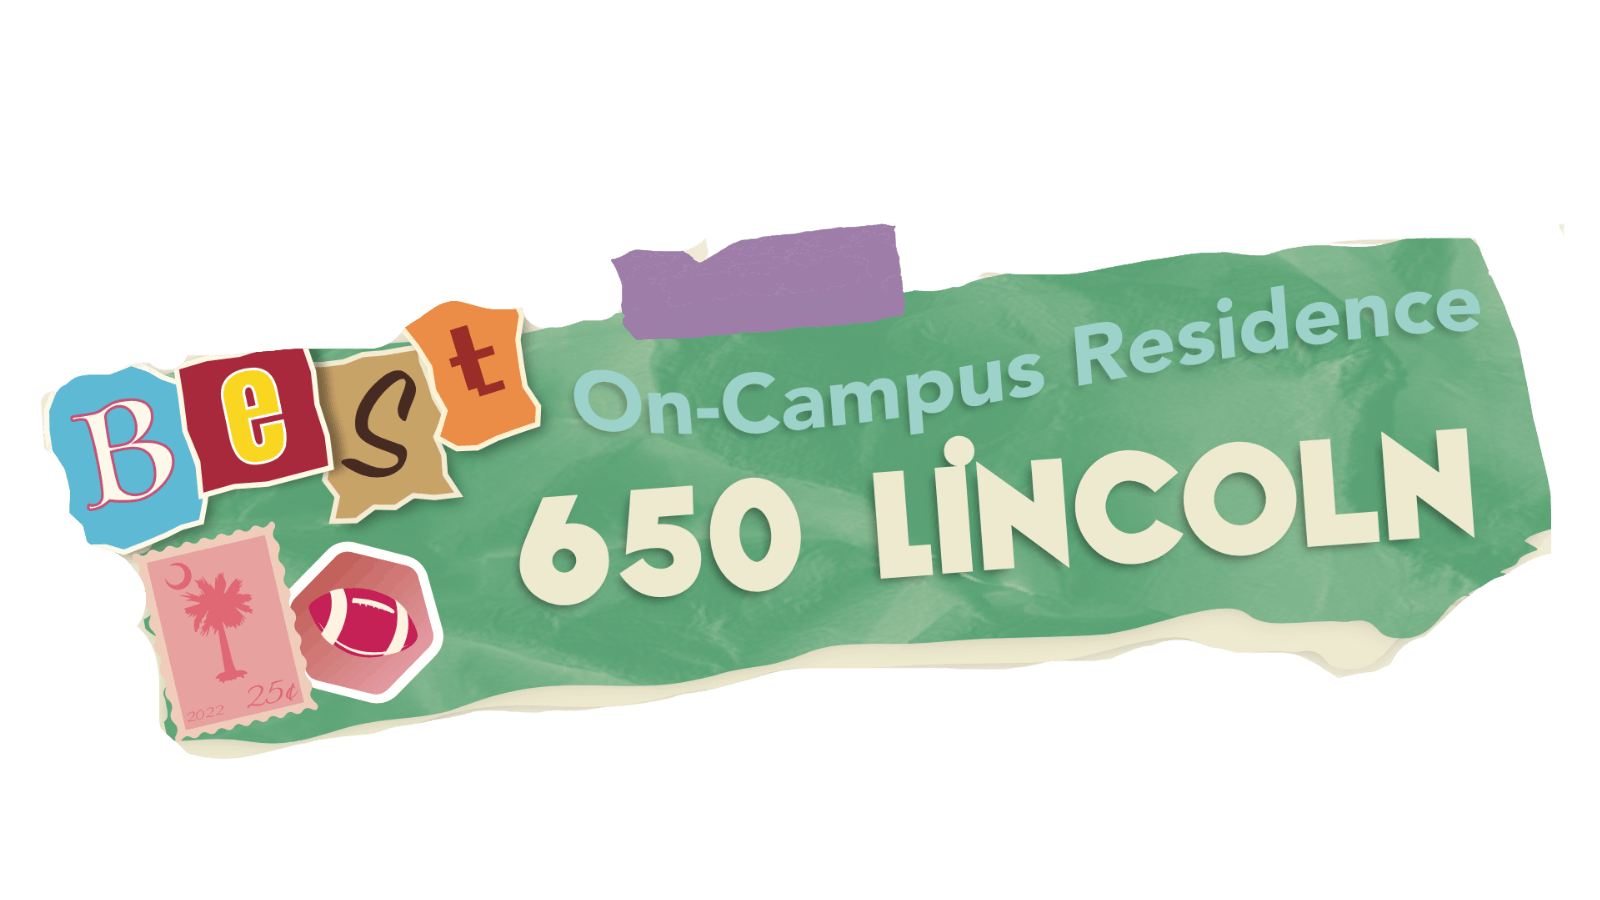 Photo for Best On-Campus Residence: 650 Lincoln